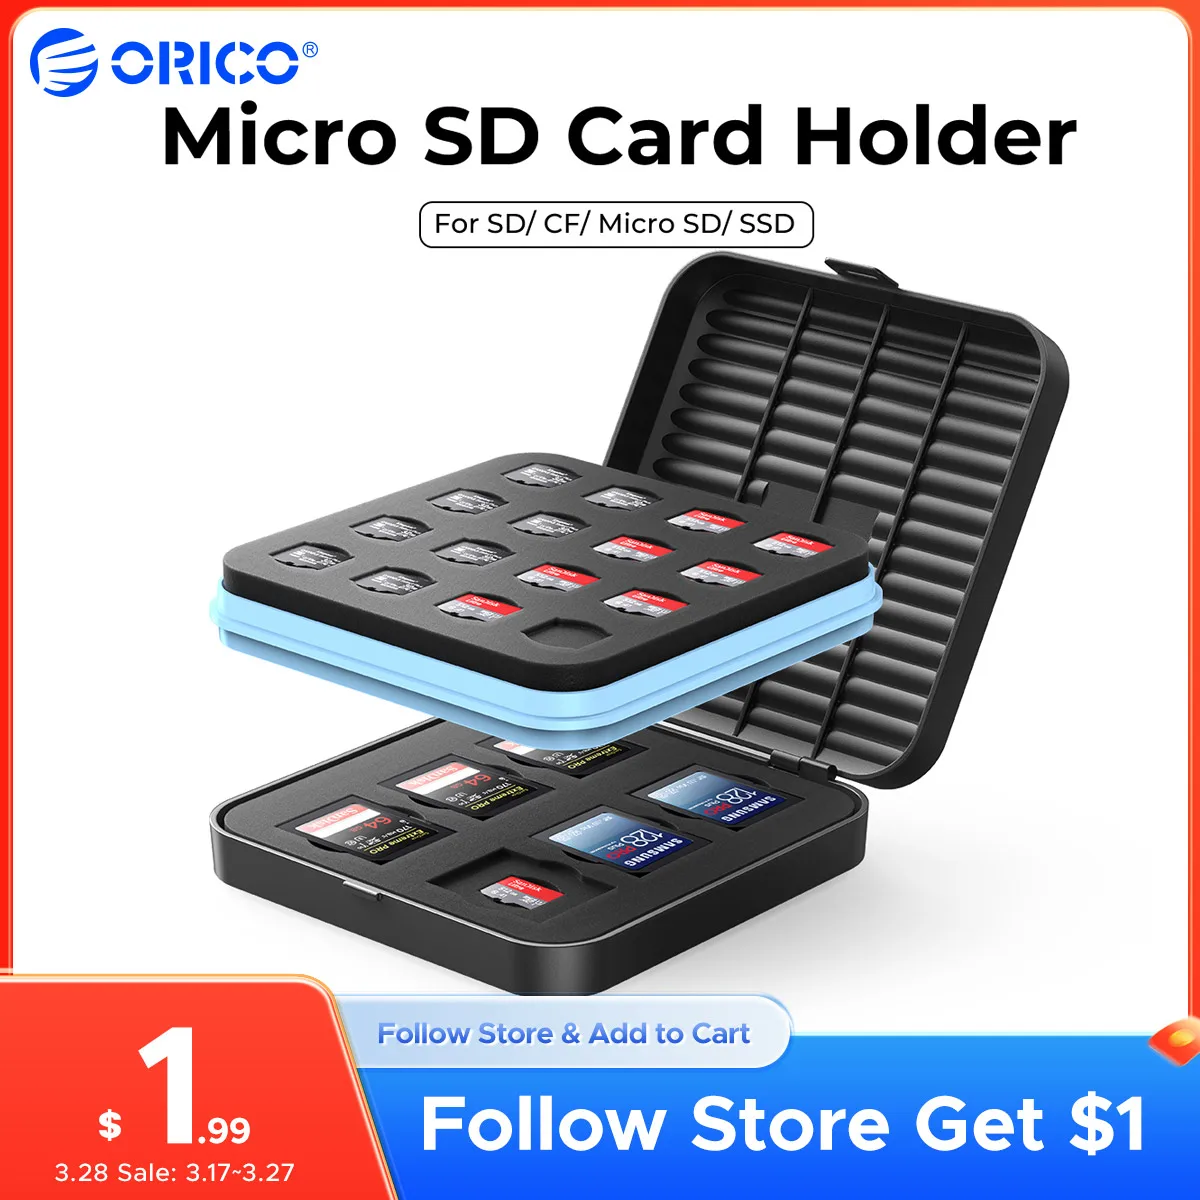 ORICO SD Card Case Micro SD Card Holder Case Soft Foam Interior Memory Card Storage Box for SSD/CF/SD Card Holder Organizer durable memory card case holder storage box organizer for sd micro sd sdxc sdhc cf tf ns game card keeper wallet protector cover